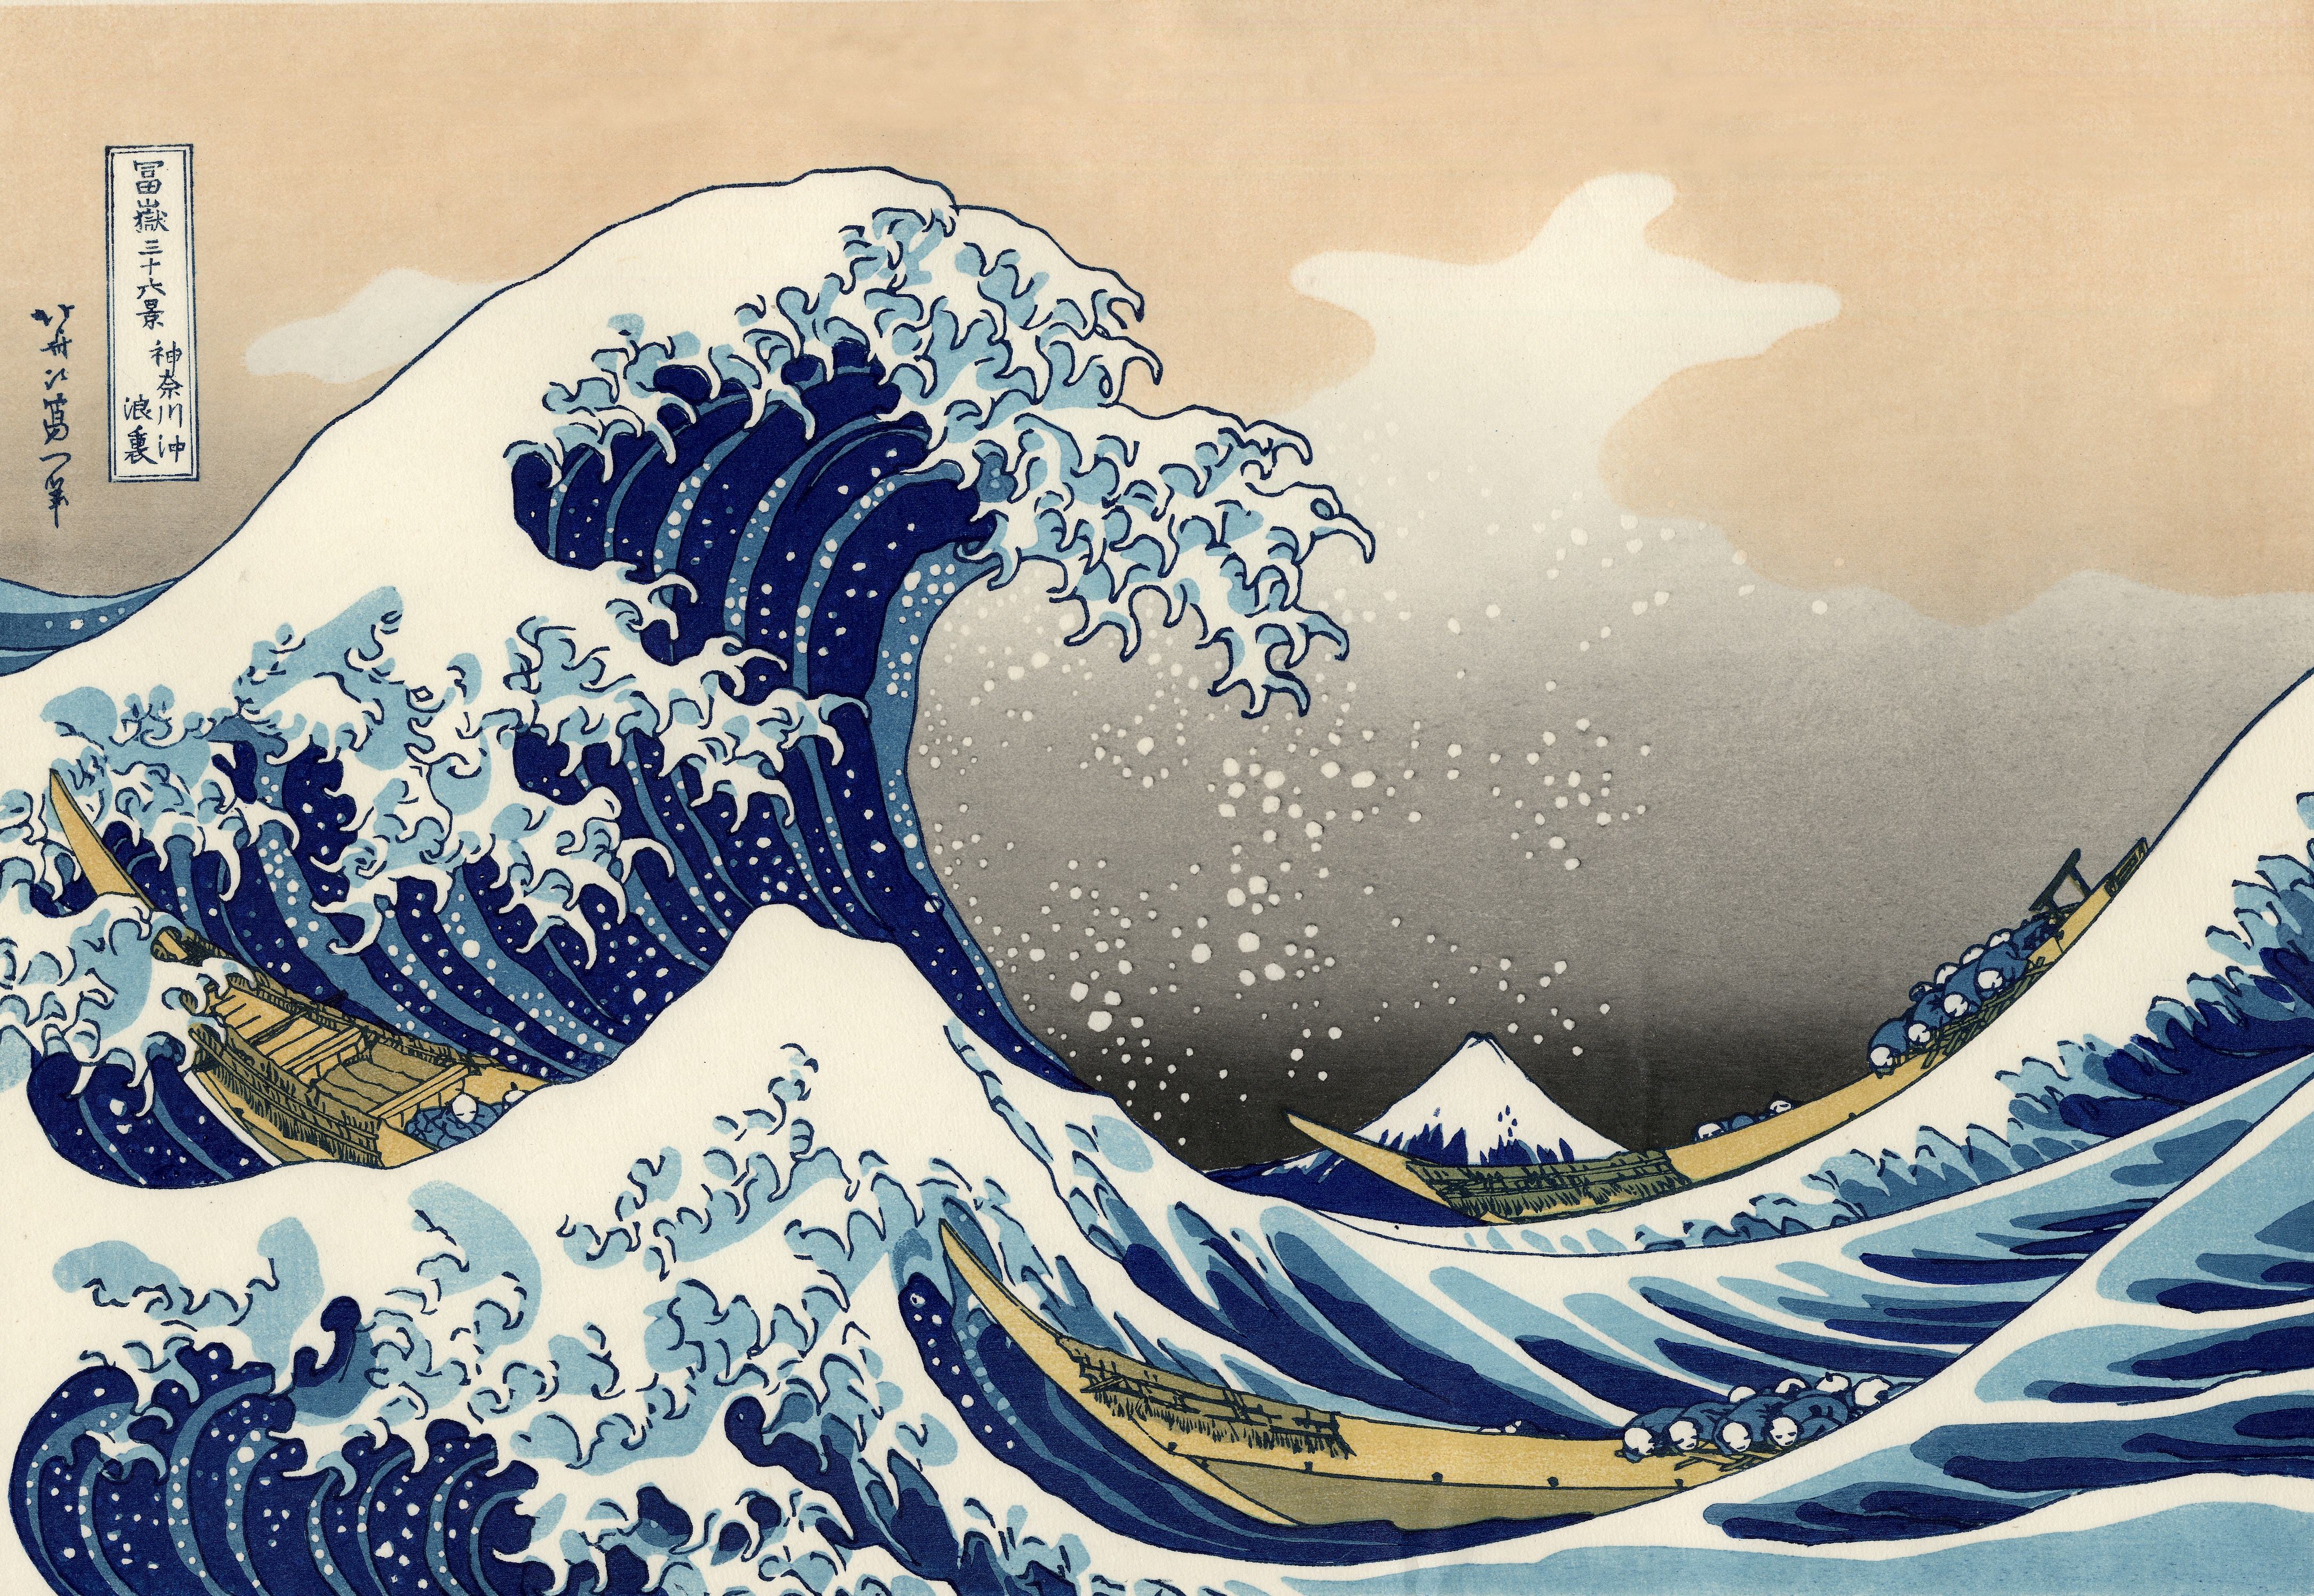 wave, the great wave off kanagawa, artistic images